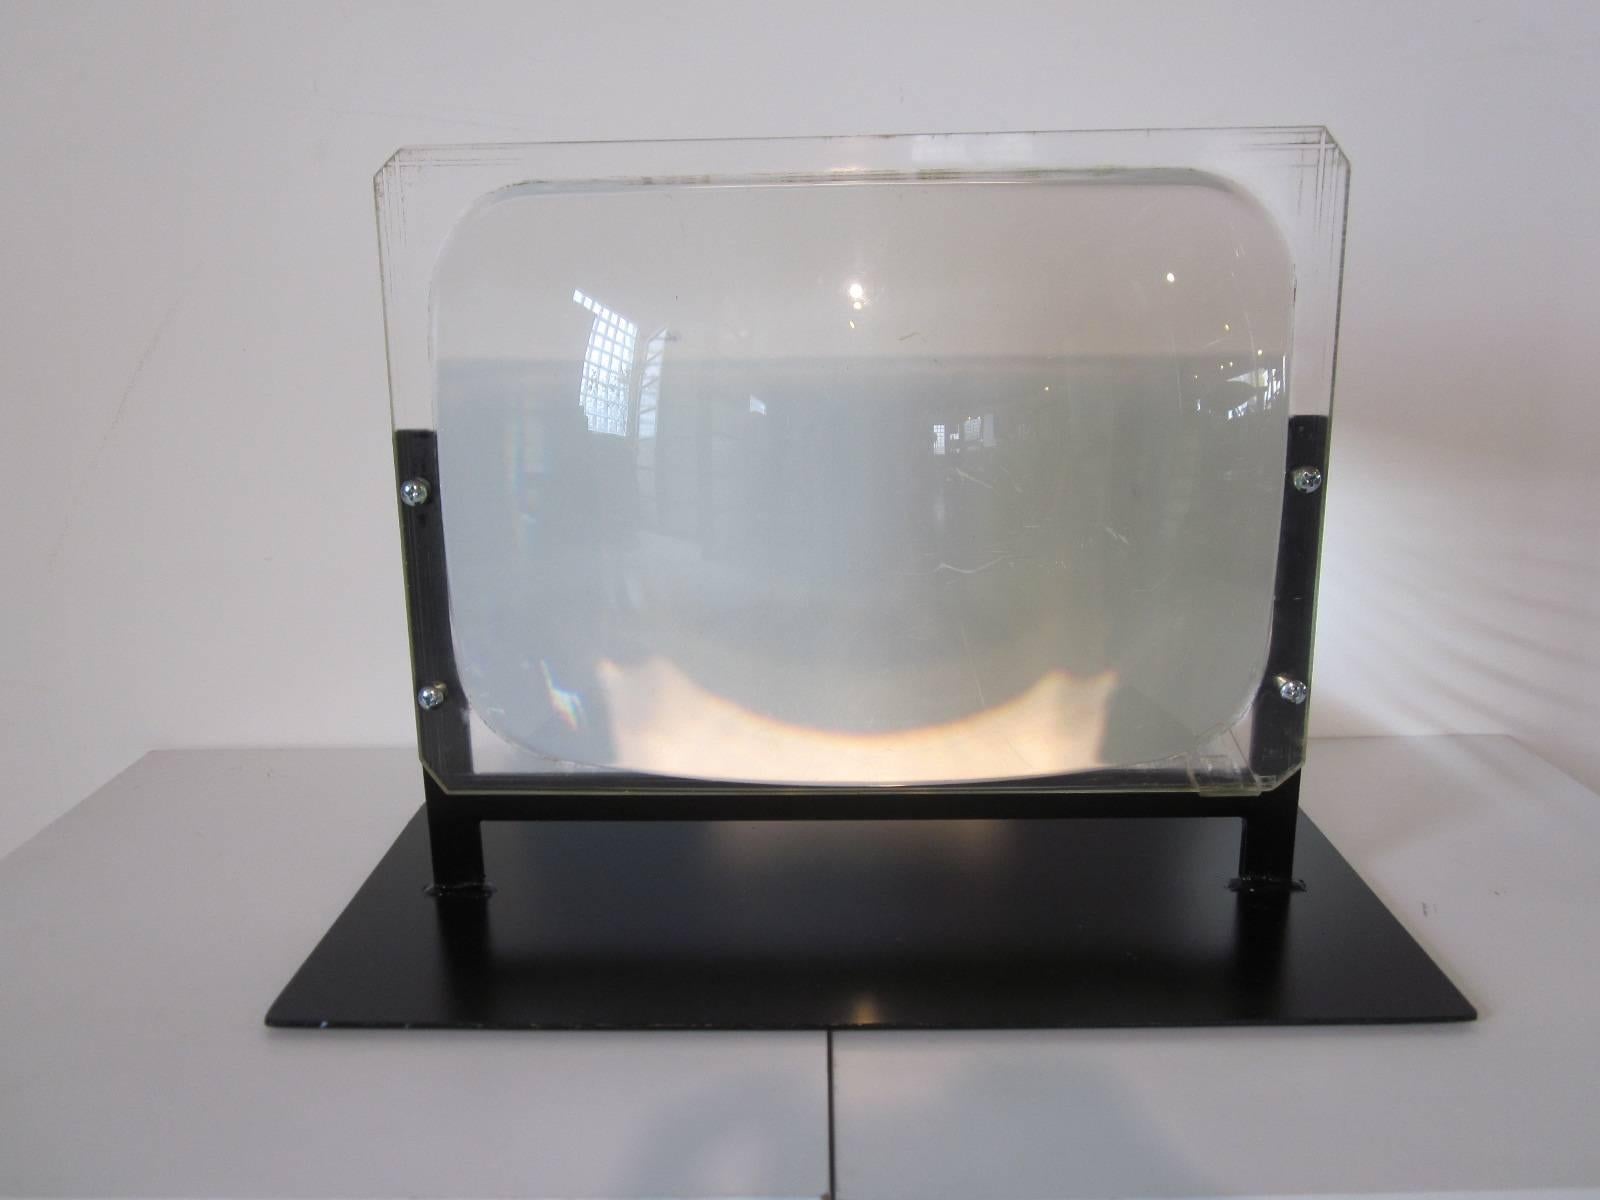 A vintage cast resin/ Lucite and liquid magnifier viewer mounted on an Industrial styled steel base. These were used in the late 1940s and early 1950s to increase the size of a TV screen when technology limited the size of a picture tube. The